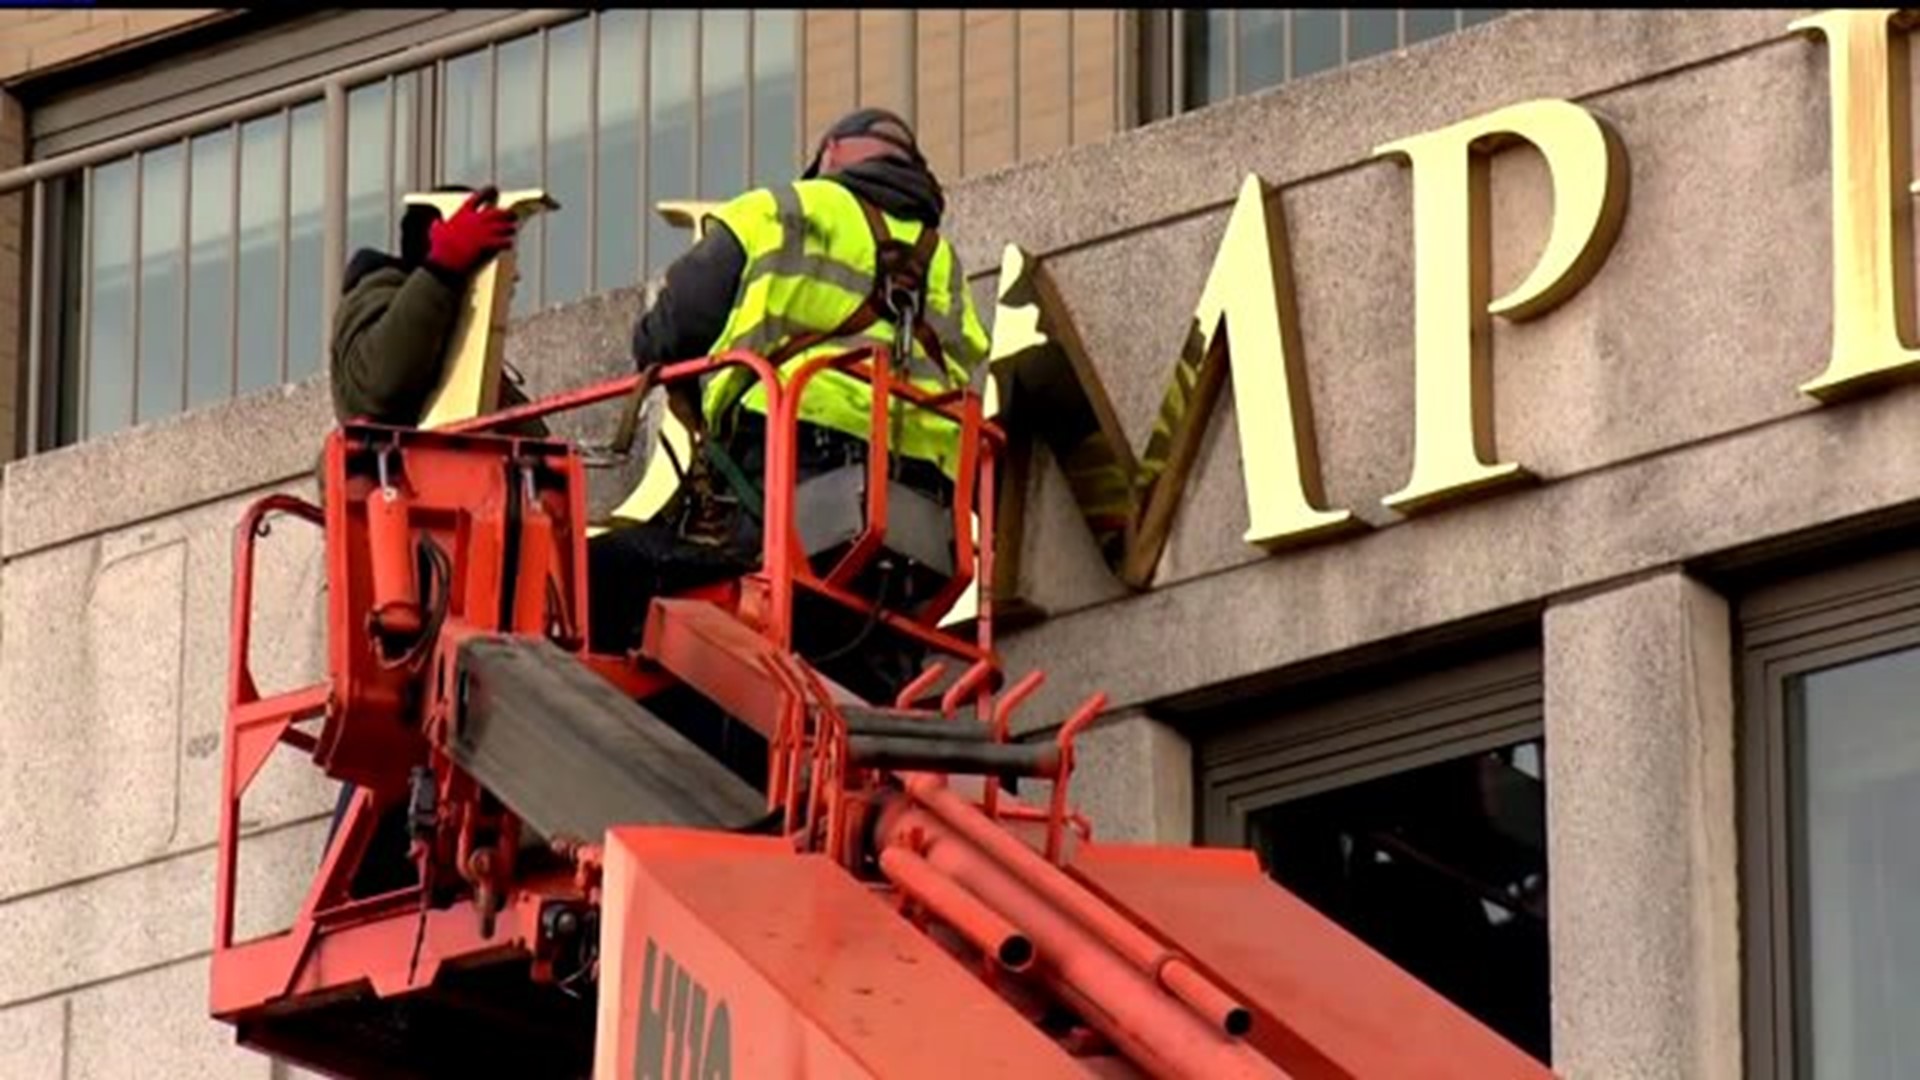 "Trump" name removed from New York buildings